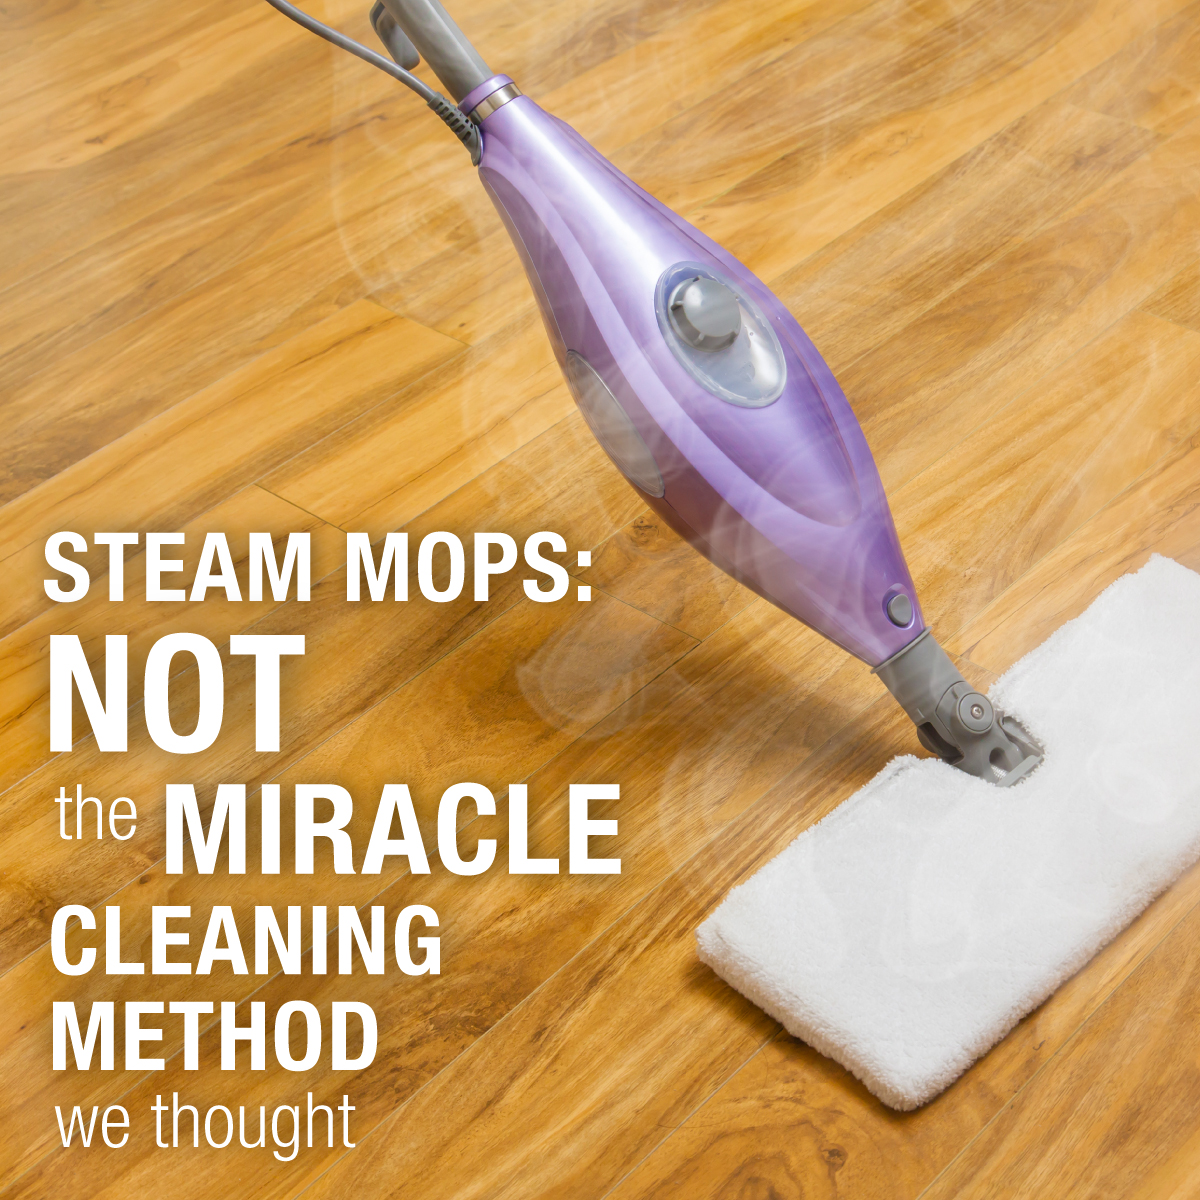 Steam Mops Not The Miracle Cleaning, Can You Use A Steamer On Vinyl Floors